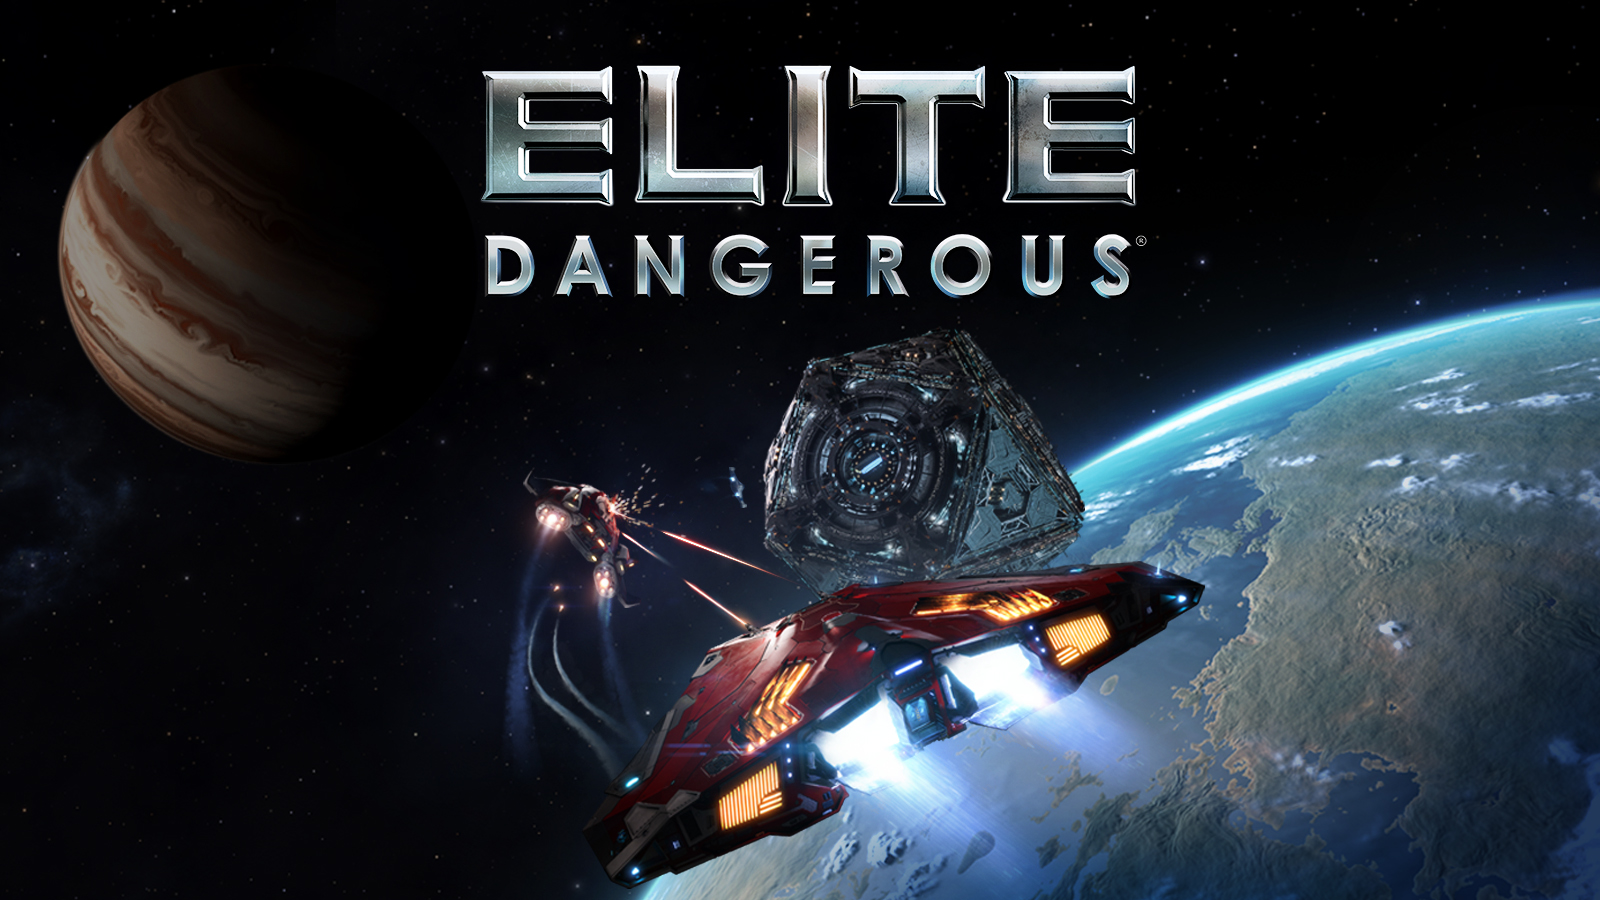 download ffxiv elite and dangerous for free